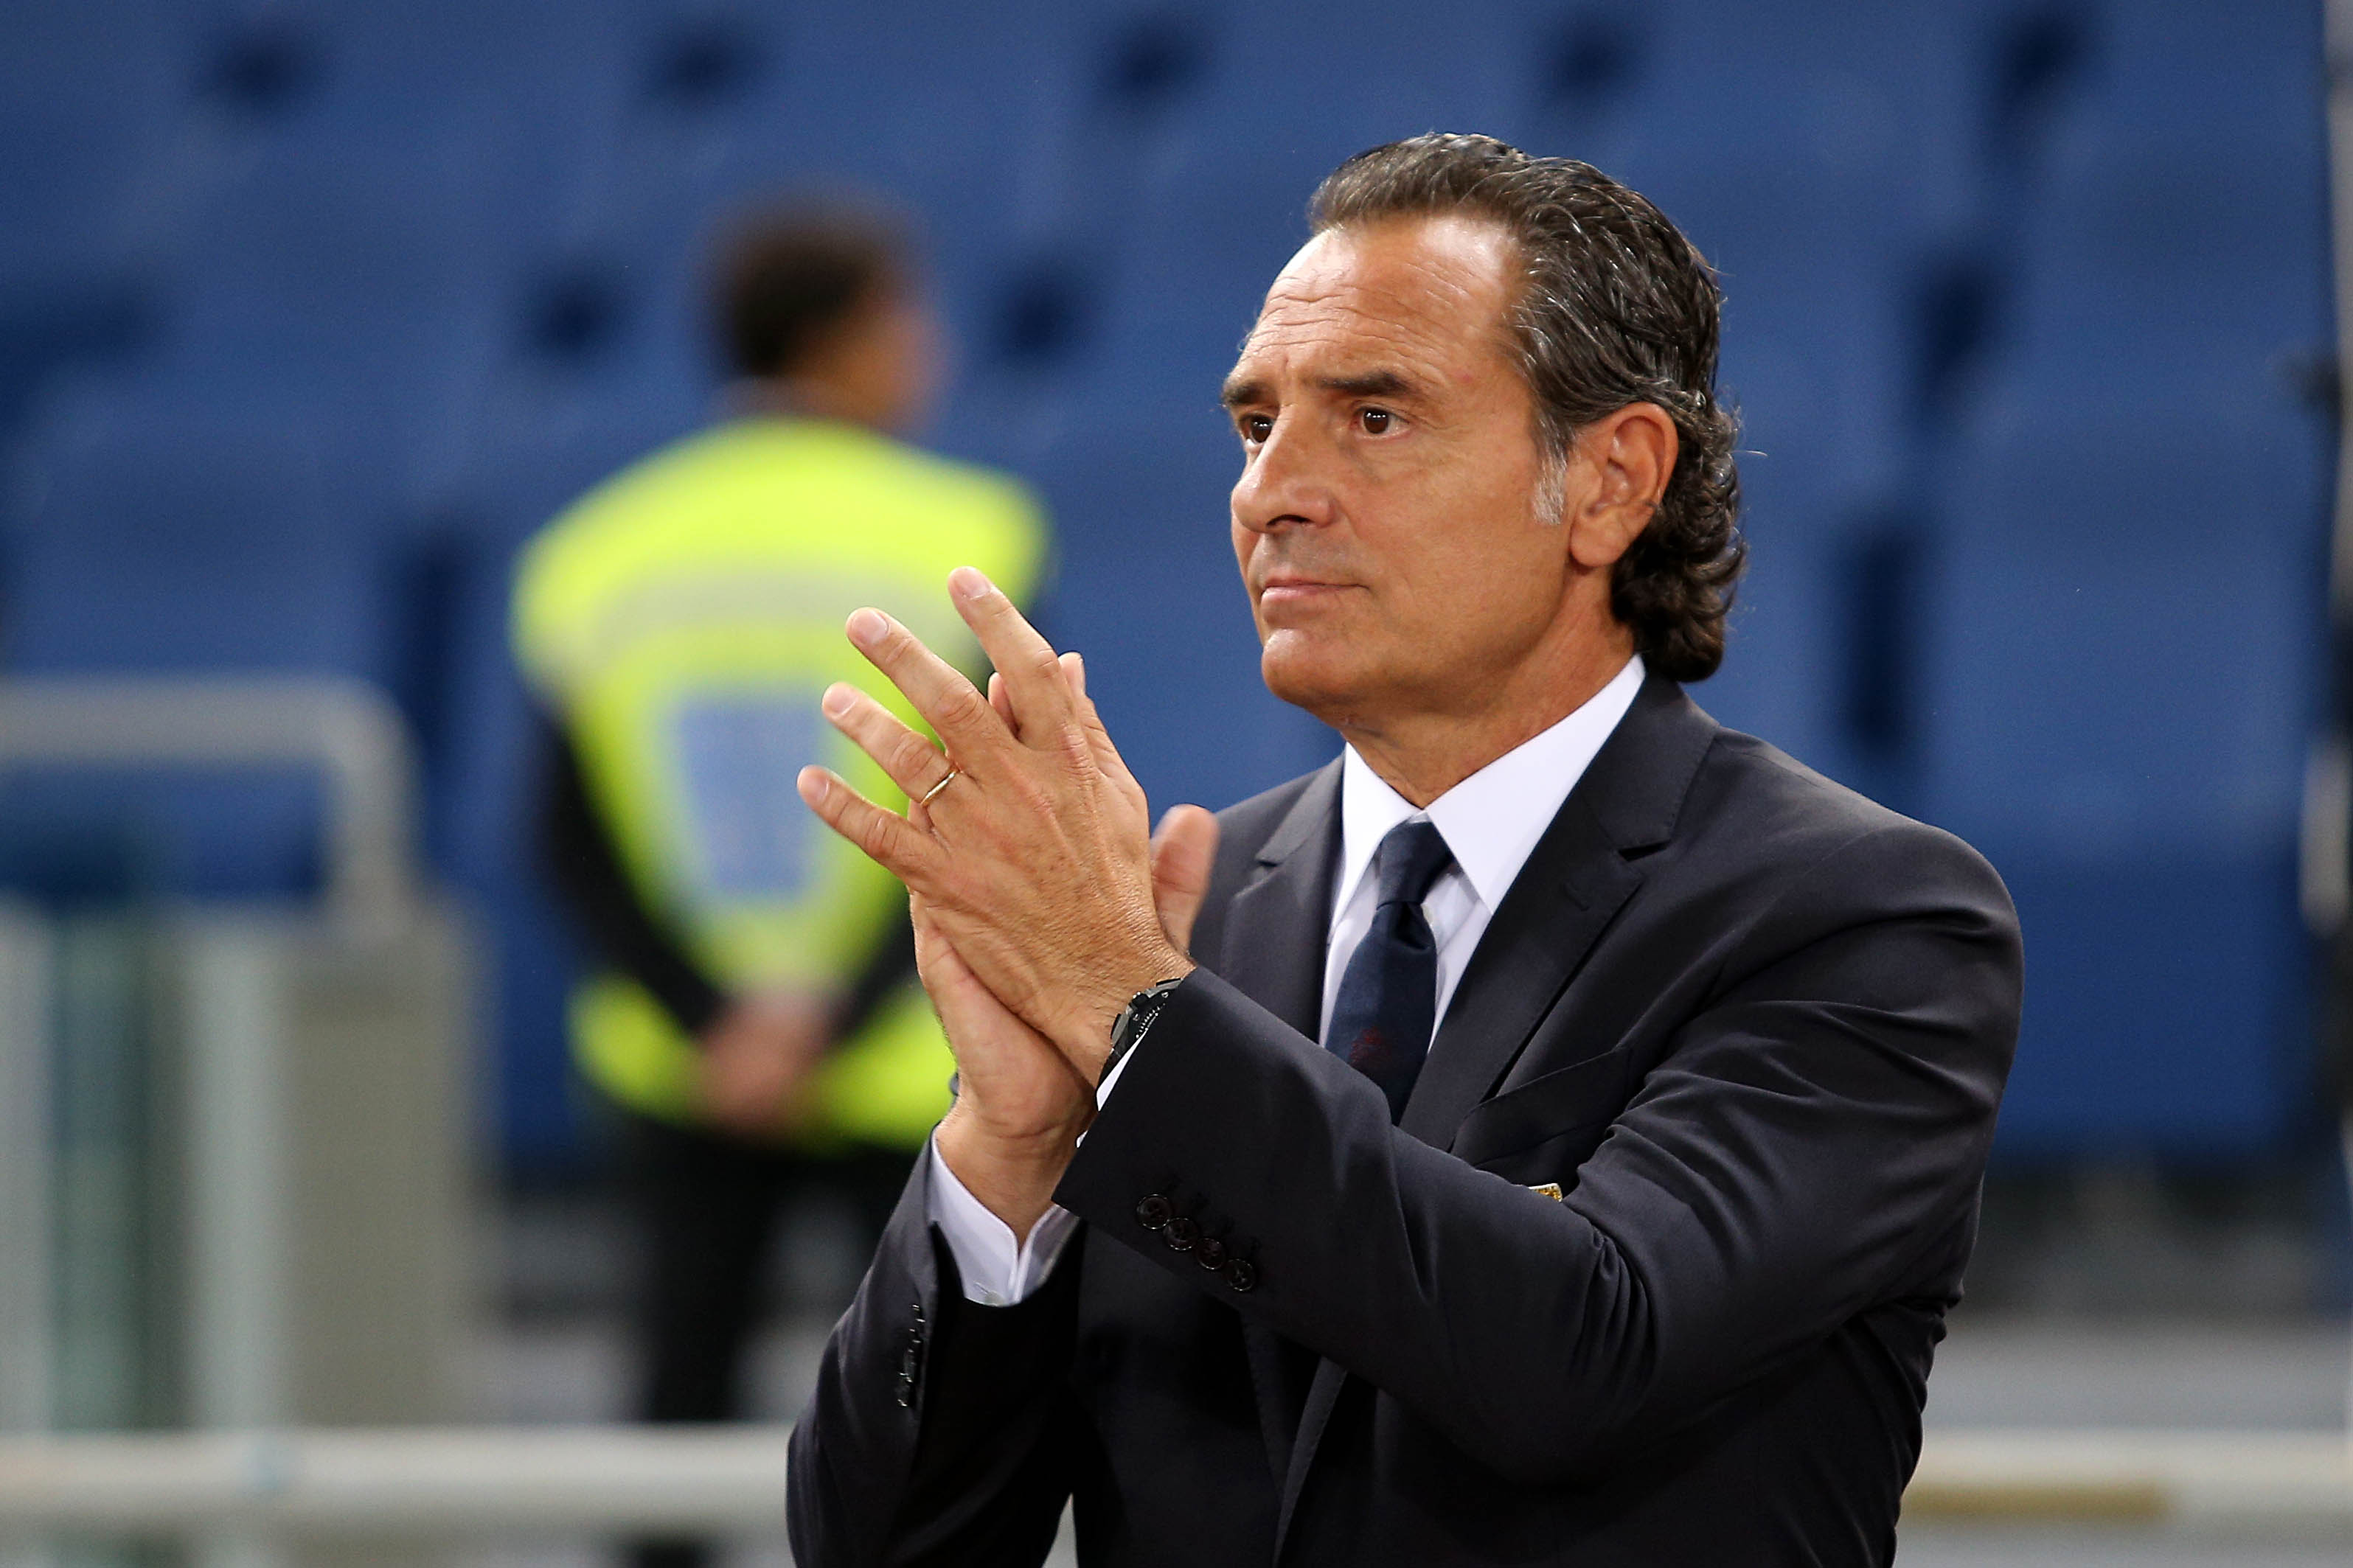 Ex-Italy Coach Cesare Prandelli: “Inter Will Find It Difficult To Play Against Torino”